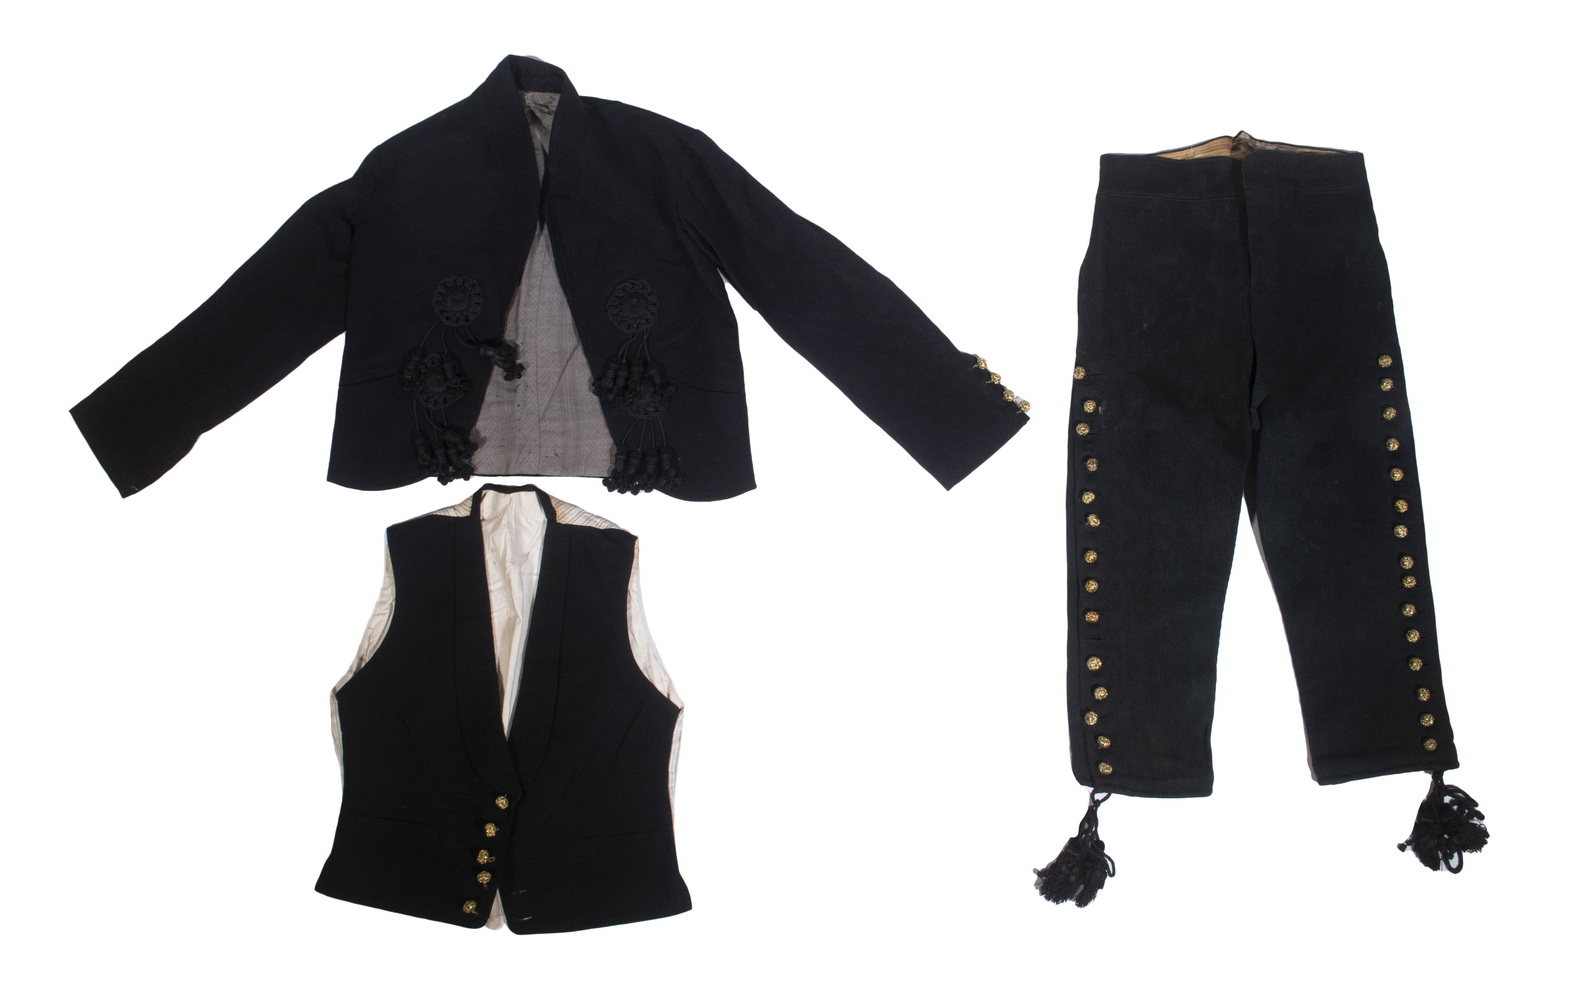  3 PC GENT S SUIT WITH BREECHES 3020a0